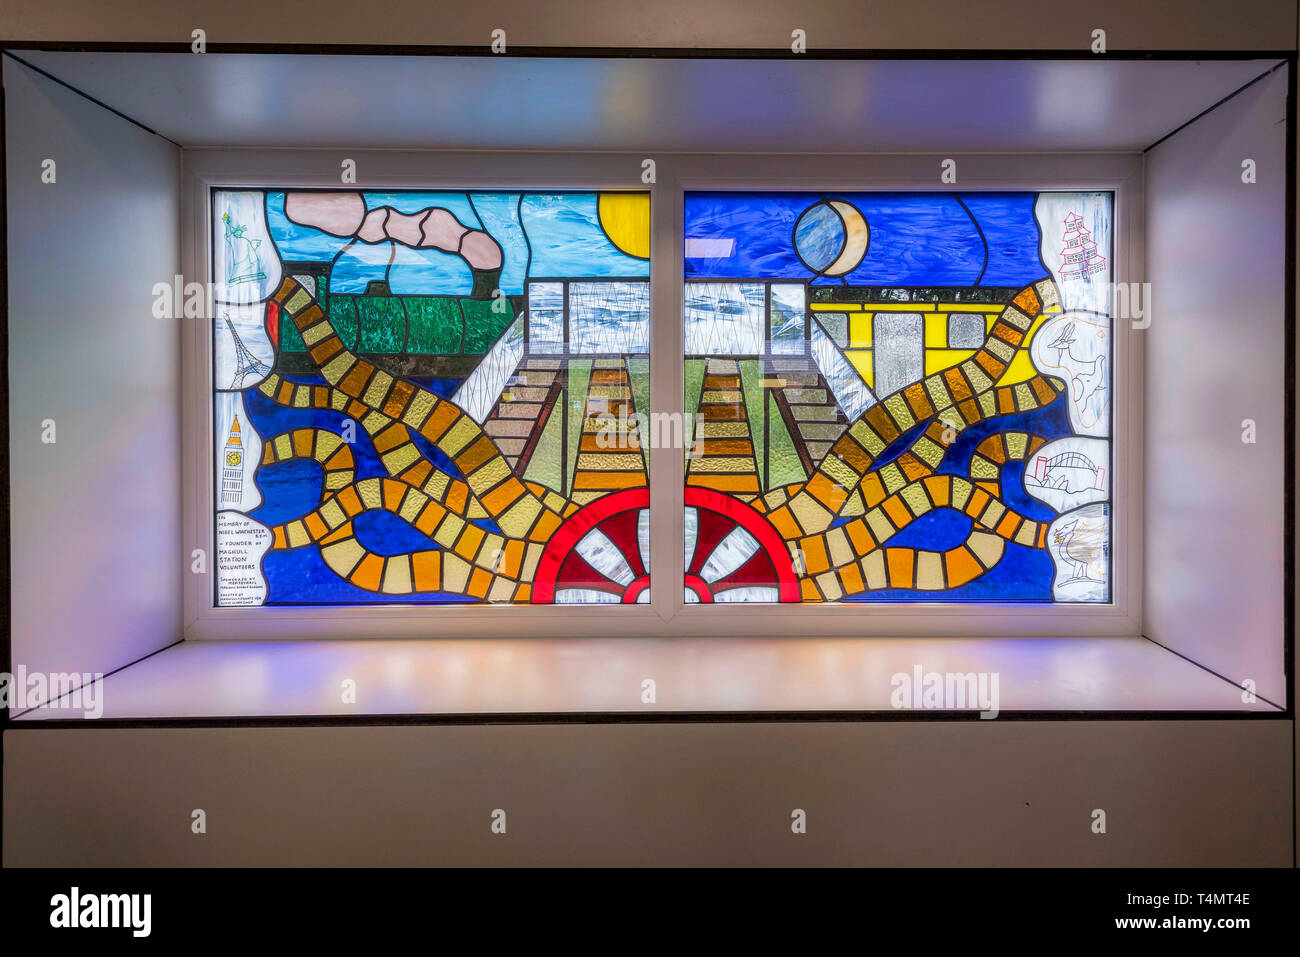 Merseyrail stained glass window dedication maghull station. Stock Photo